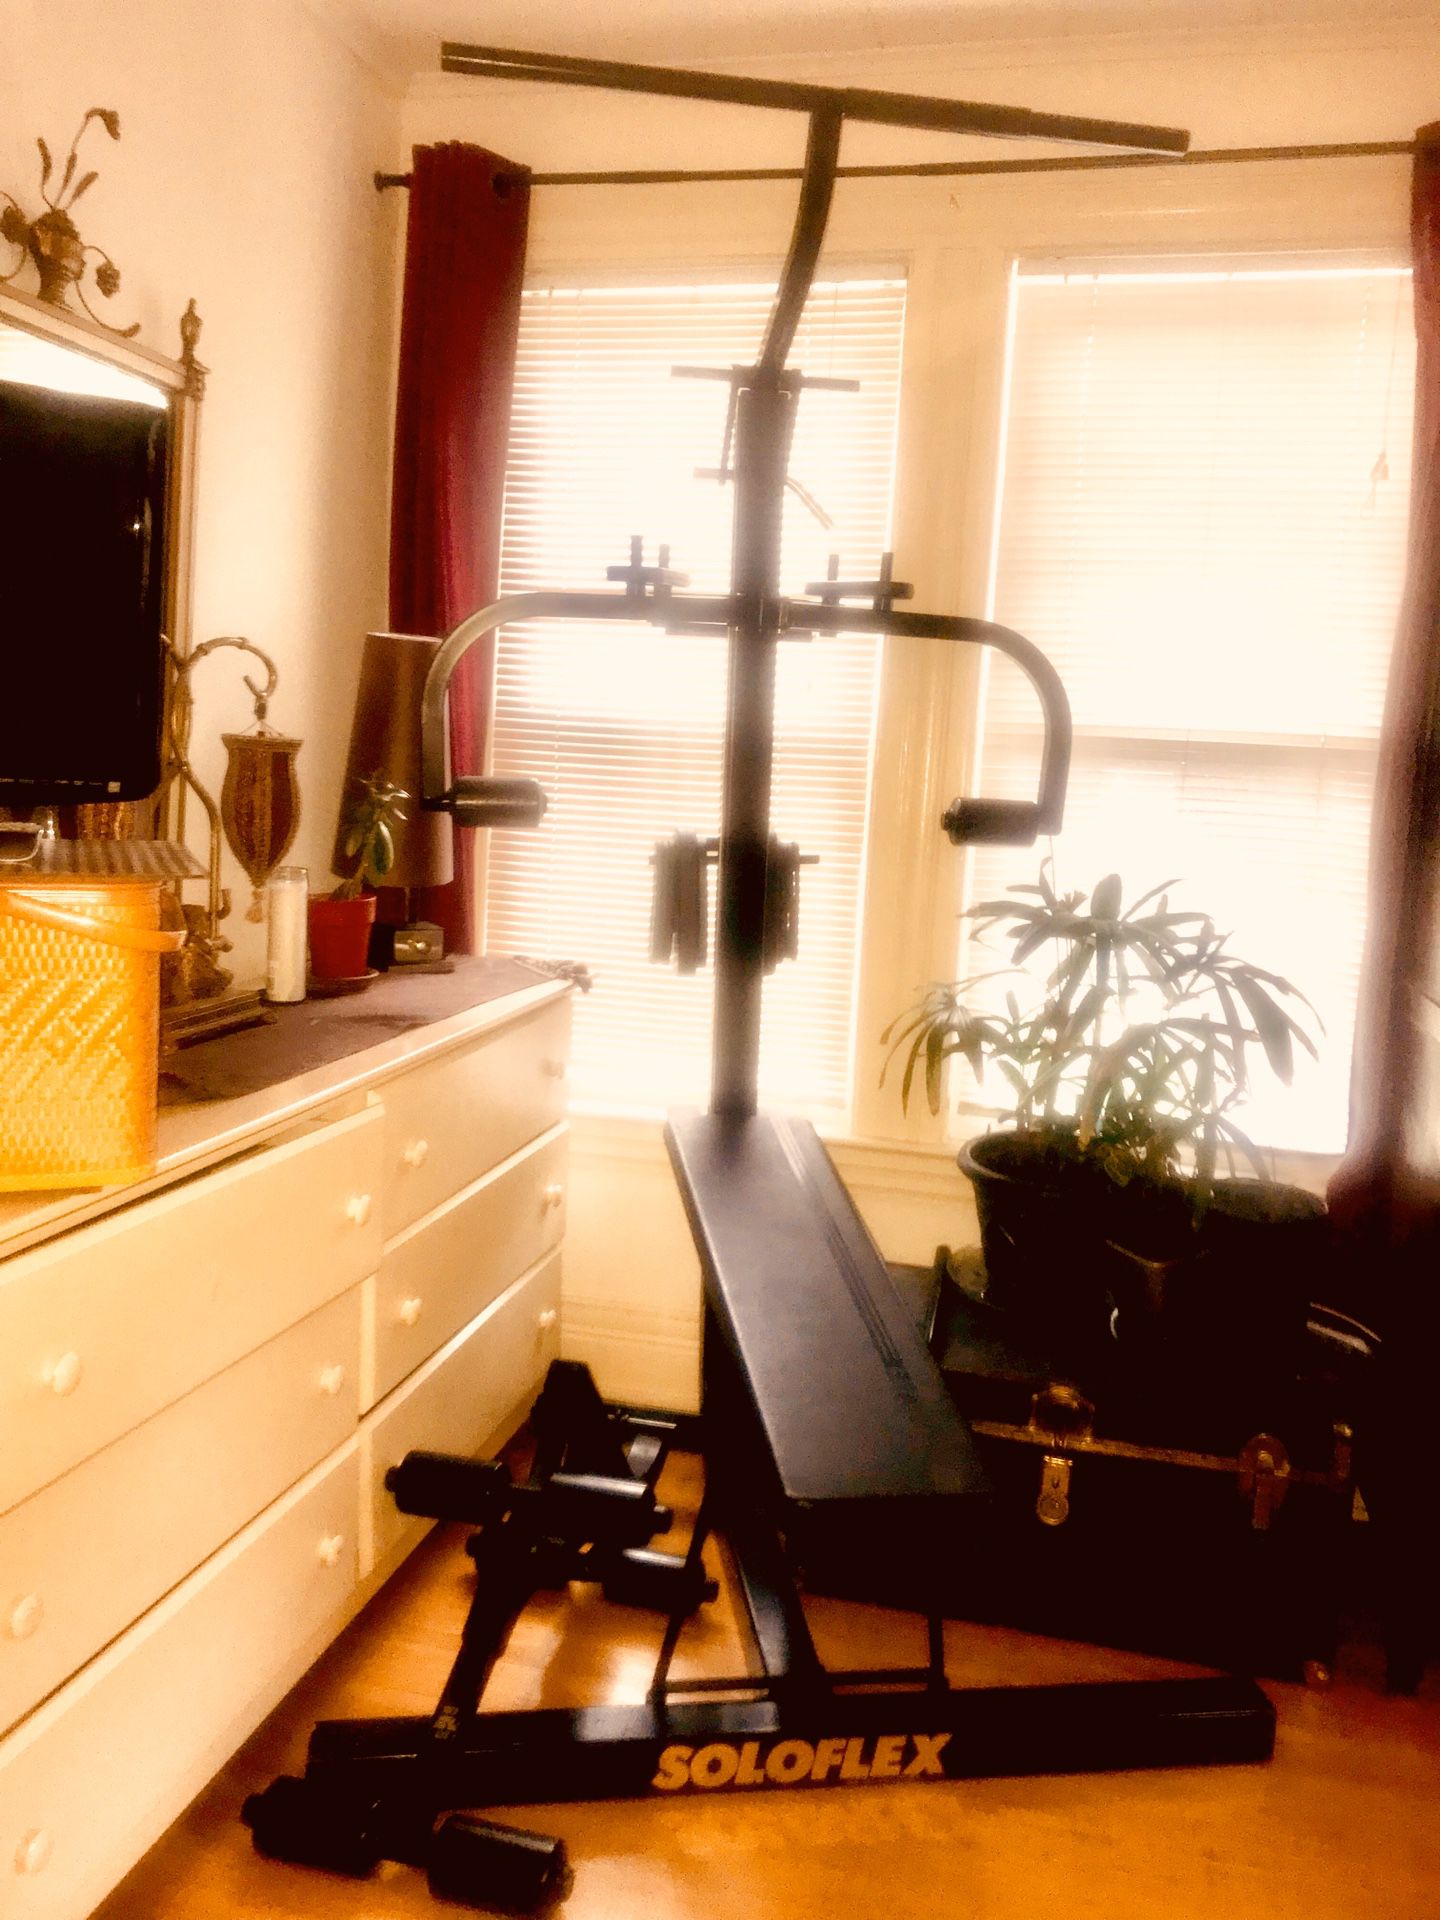 Home gym professional equipment Soloflex exercise prefer to have local buyer that would want to pick it up .